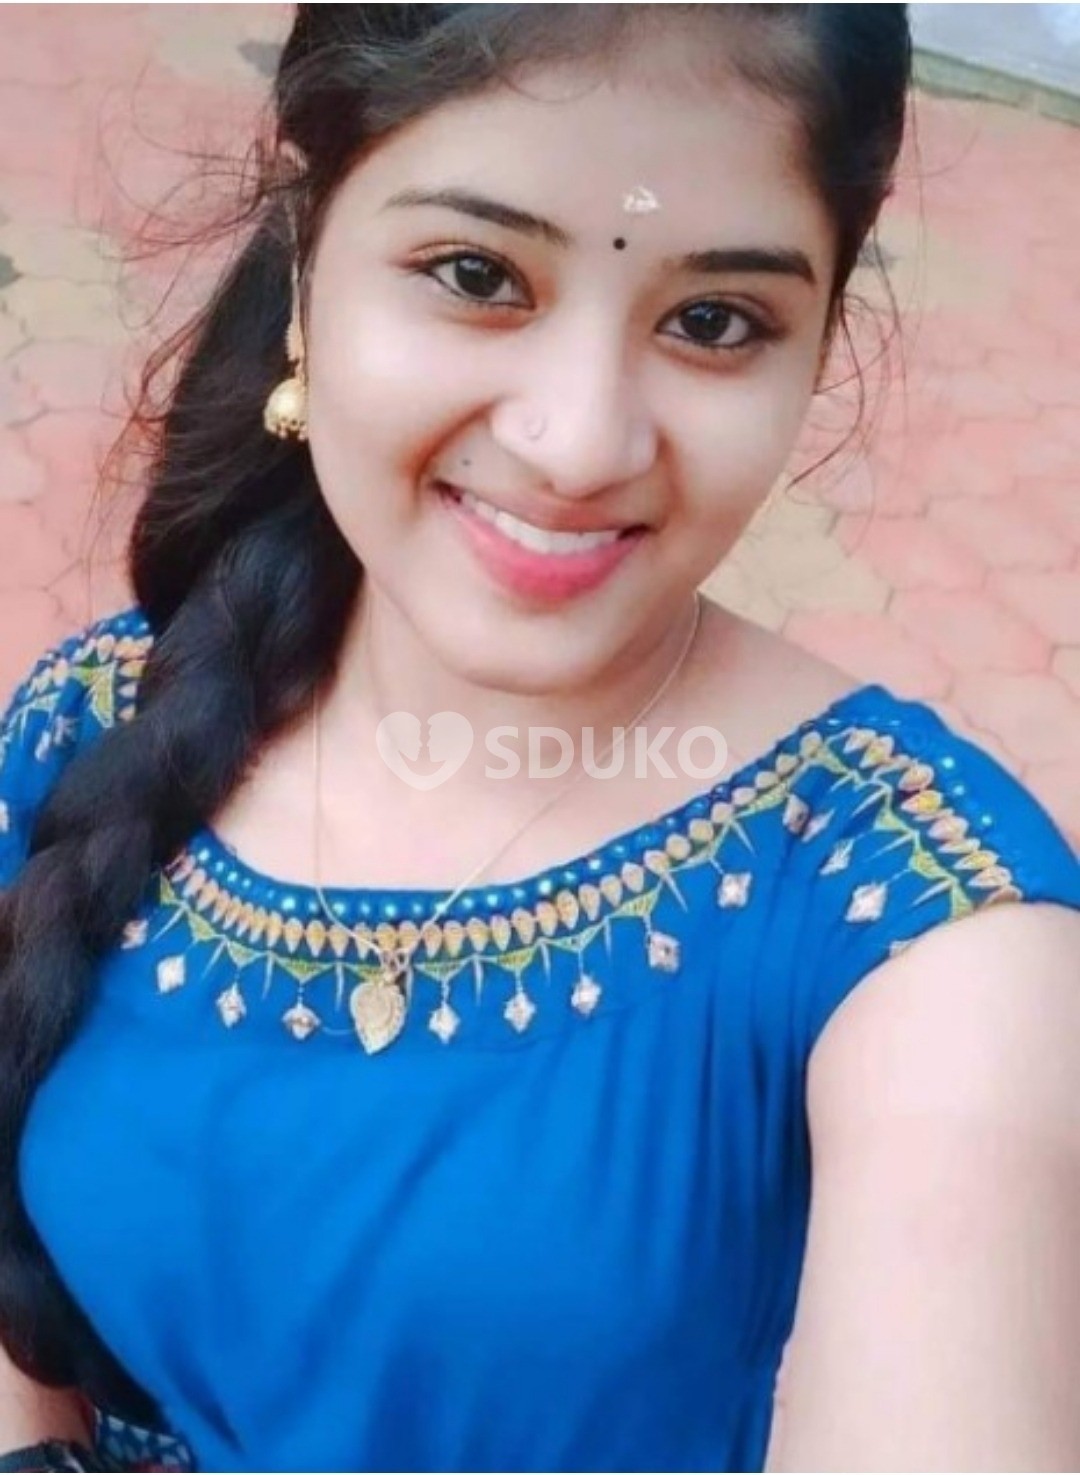 BHIMAVARAM 💙🔥MY SELF DIVYA UNLIMITED SEX CUTE BEST SERVICE AND SAFE AND SECURE AND 24 HR AVAILABLE